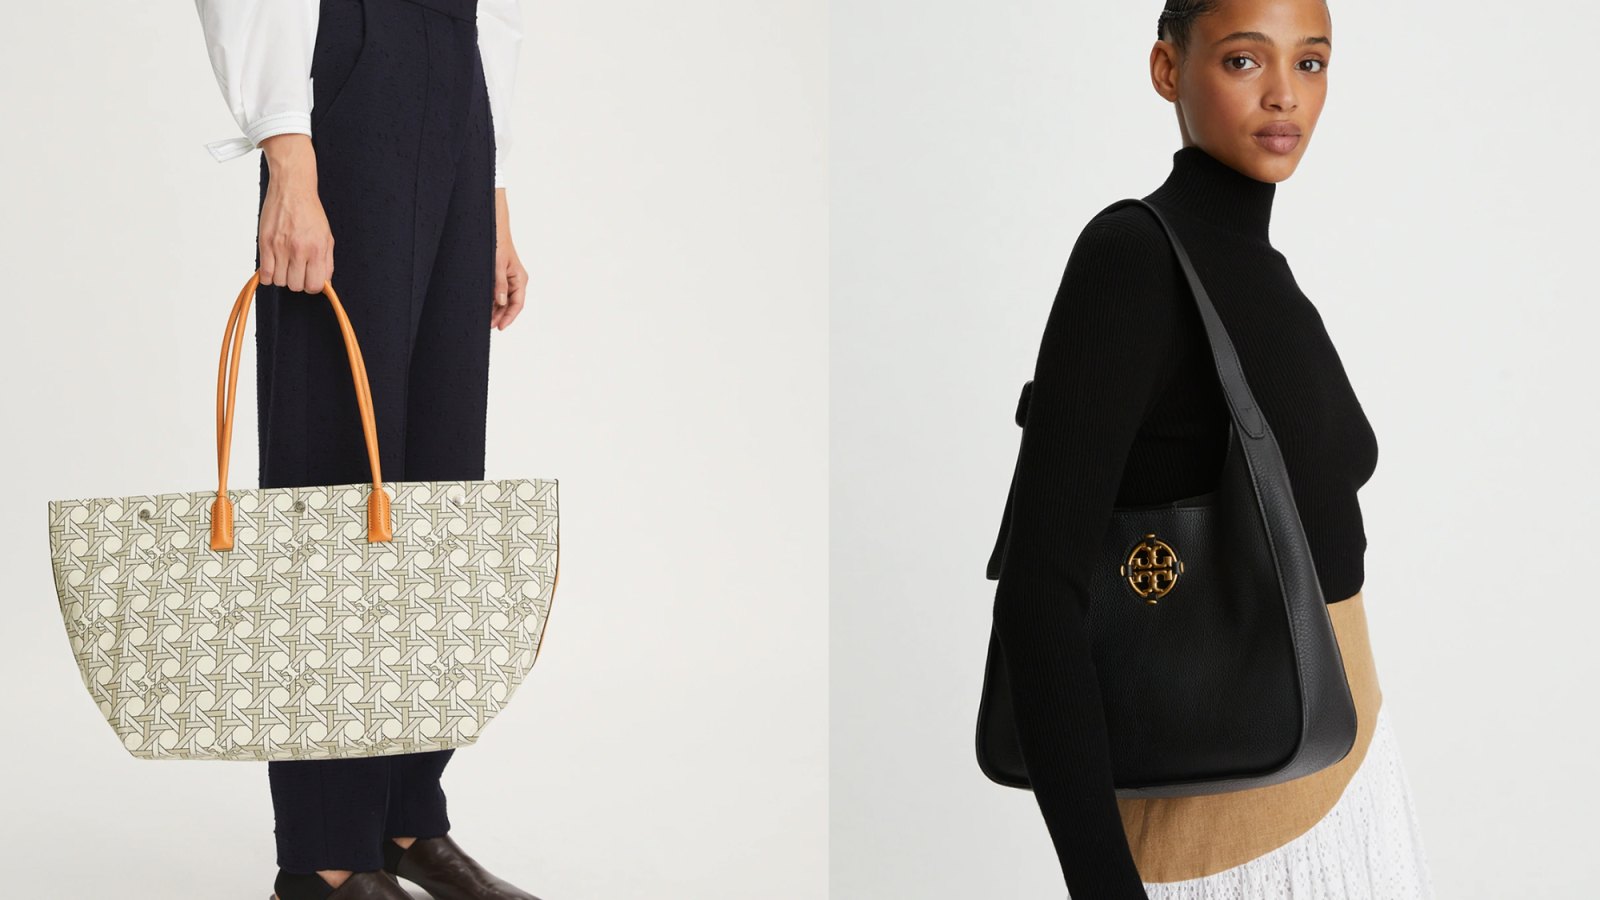 Tory Burch Exclusive Sale: Items, Prices, Where to Buy